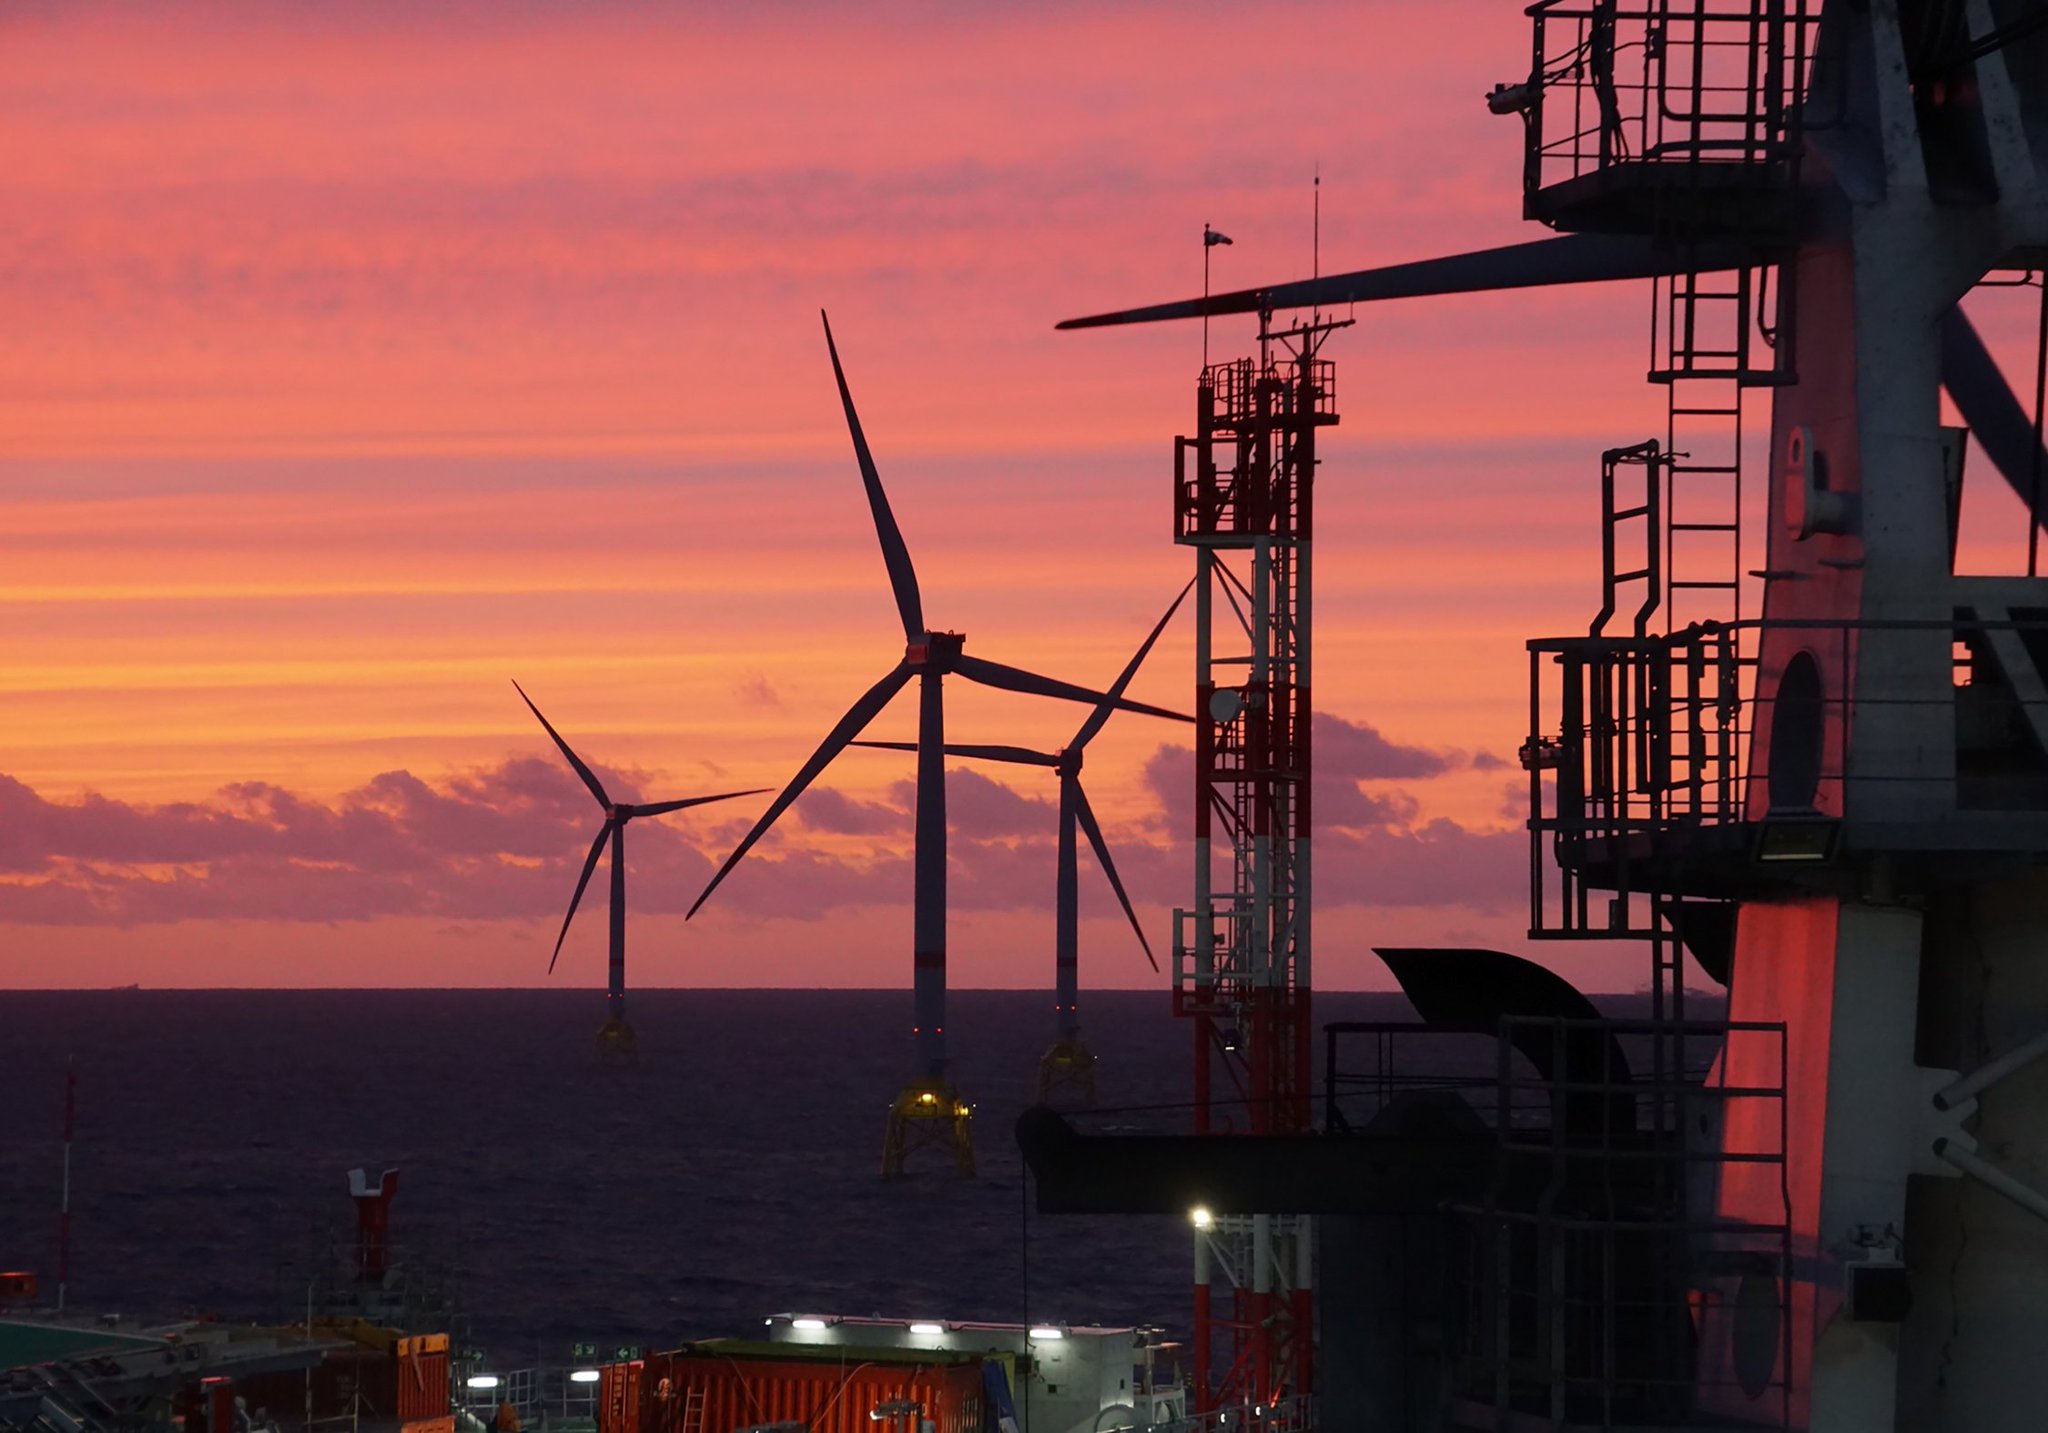 A photo of Iberdrola's Wikinger offshore wind farm